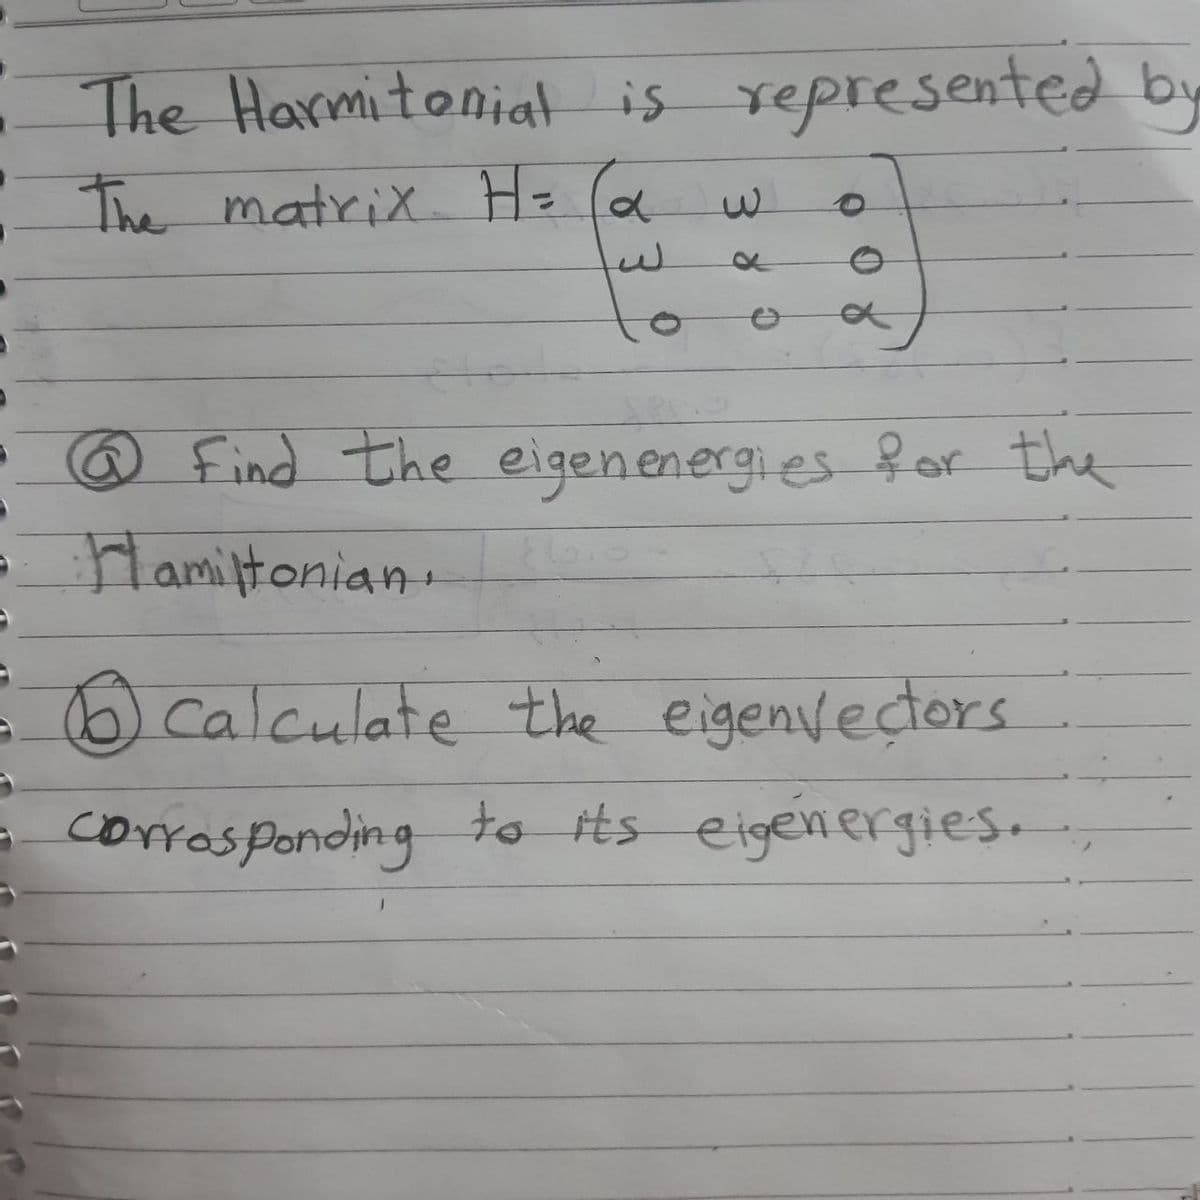 The Harmitoniat is represented by
The matriX H= (a
@Find the eigenenergi es for the
Hamiltonian.
Calculate the eigenvectors
corrasponding
to its eigenergies.
